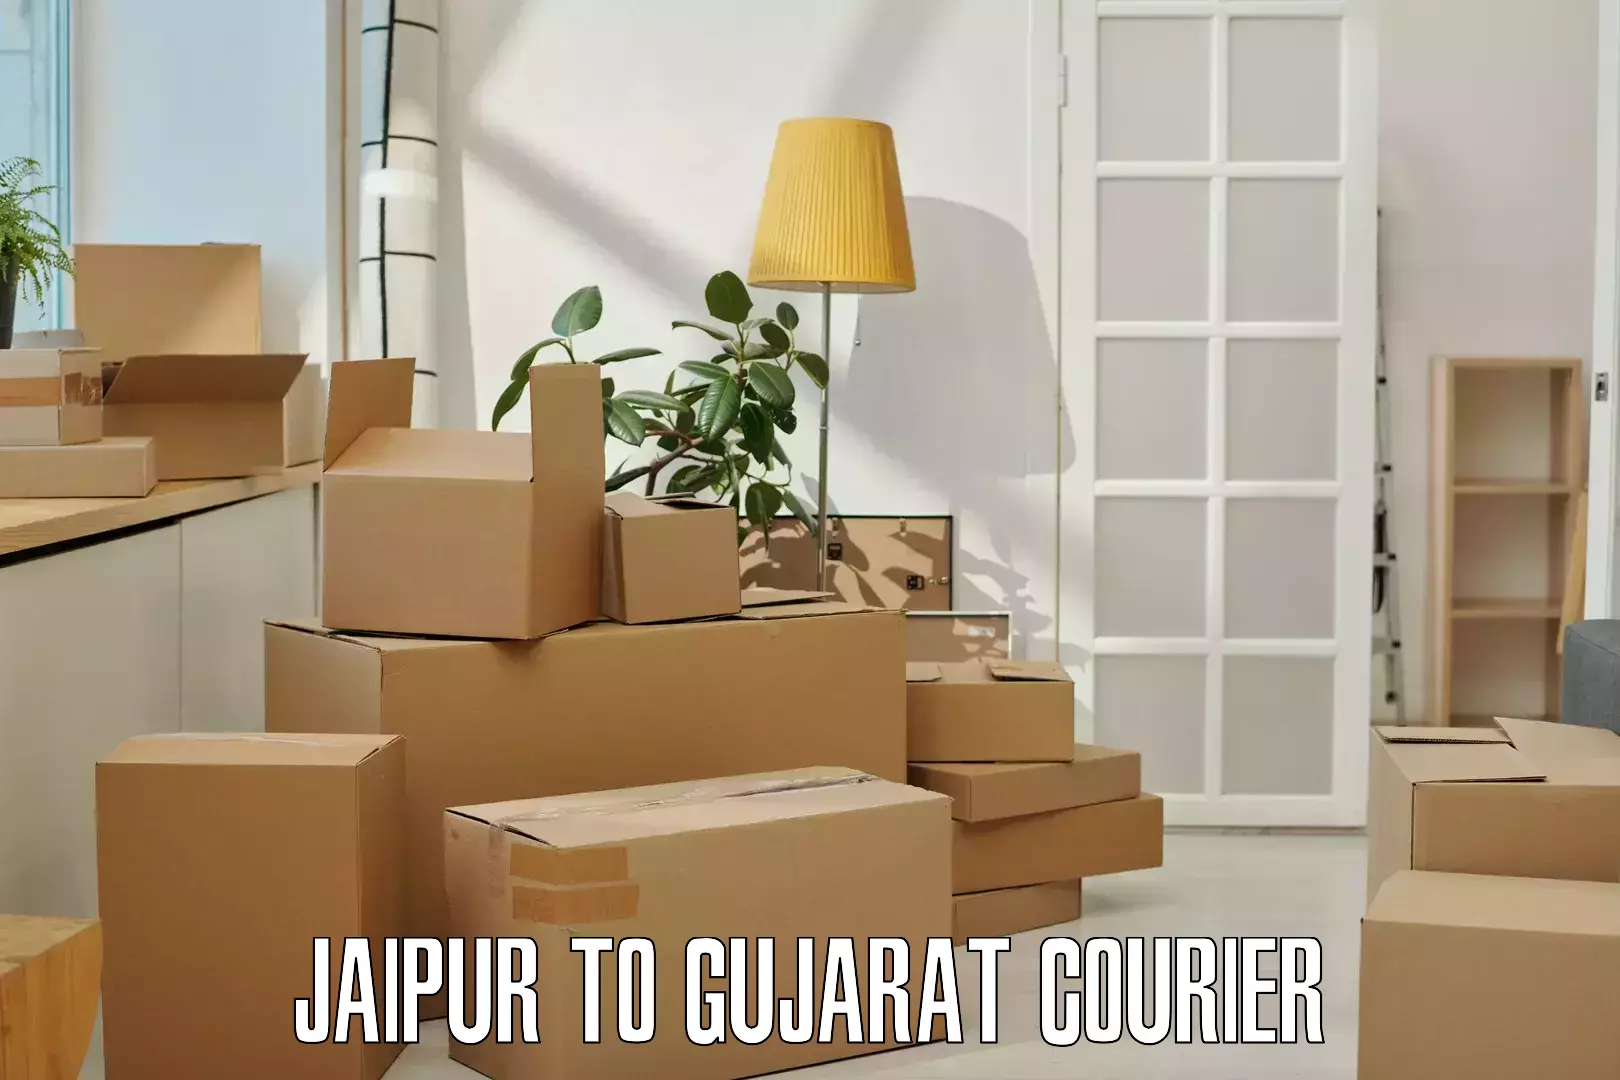 24-hour courier service Jaipur to Matar